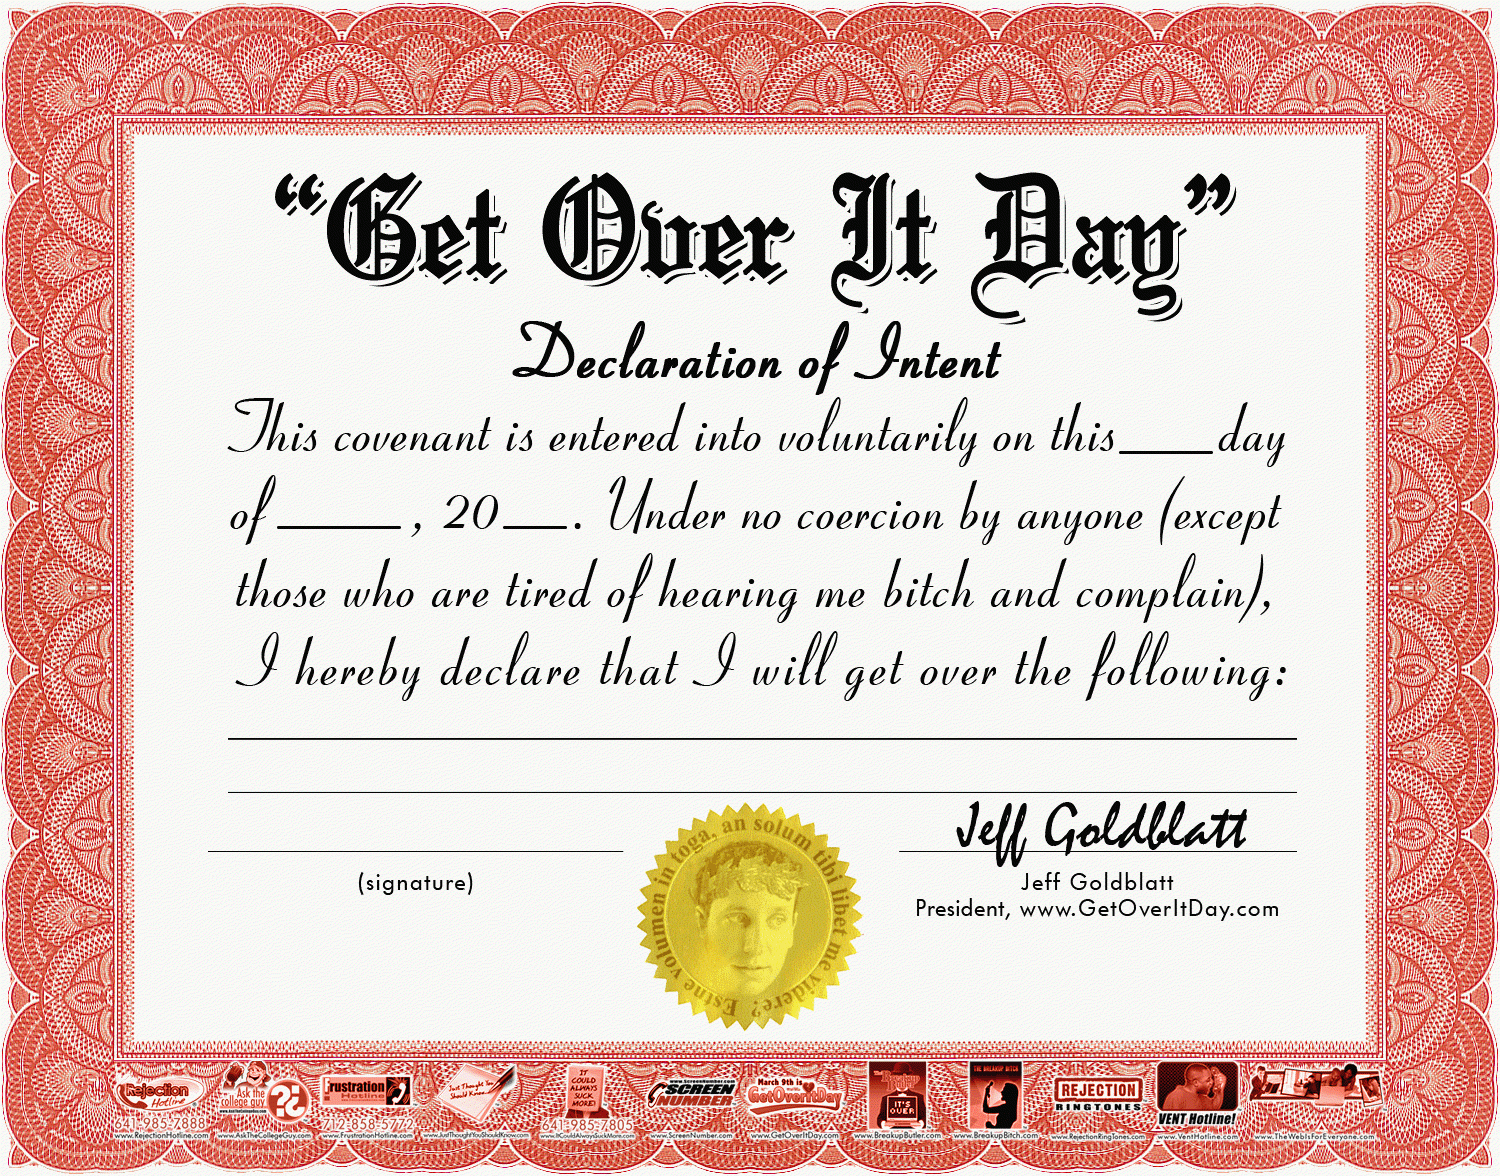 Funny Office Awards Youtube. Silly Certificates Funny Awards Regarding Funny Certificate Templates